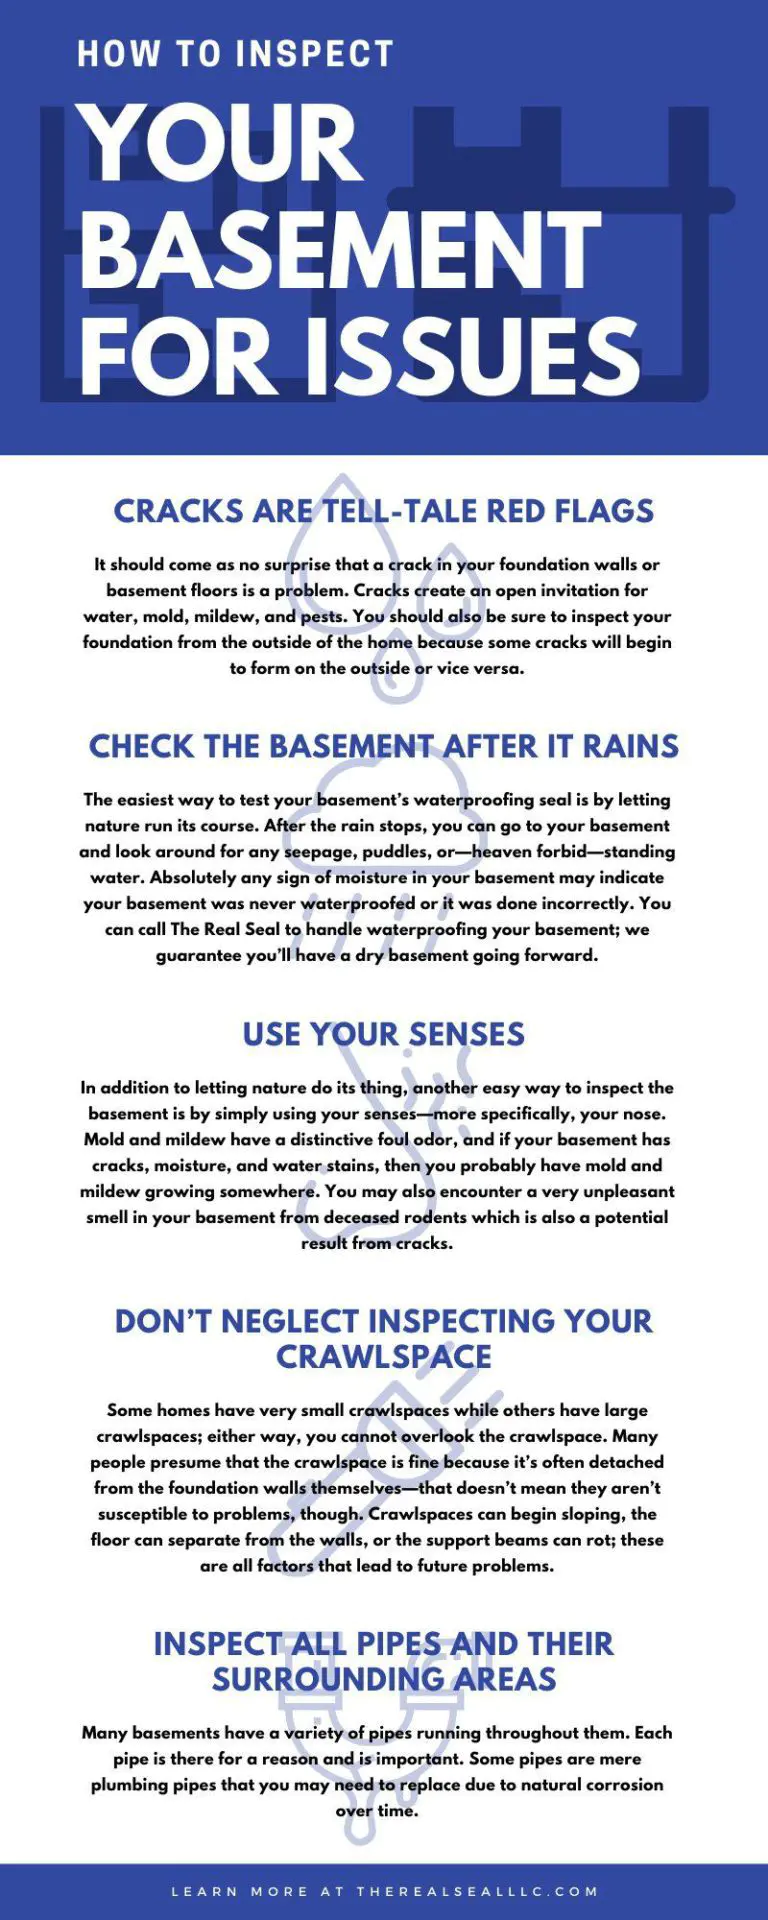 How To Inspect Your Basement for Issues